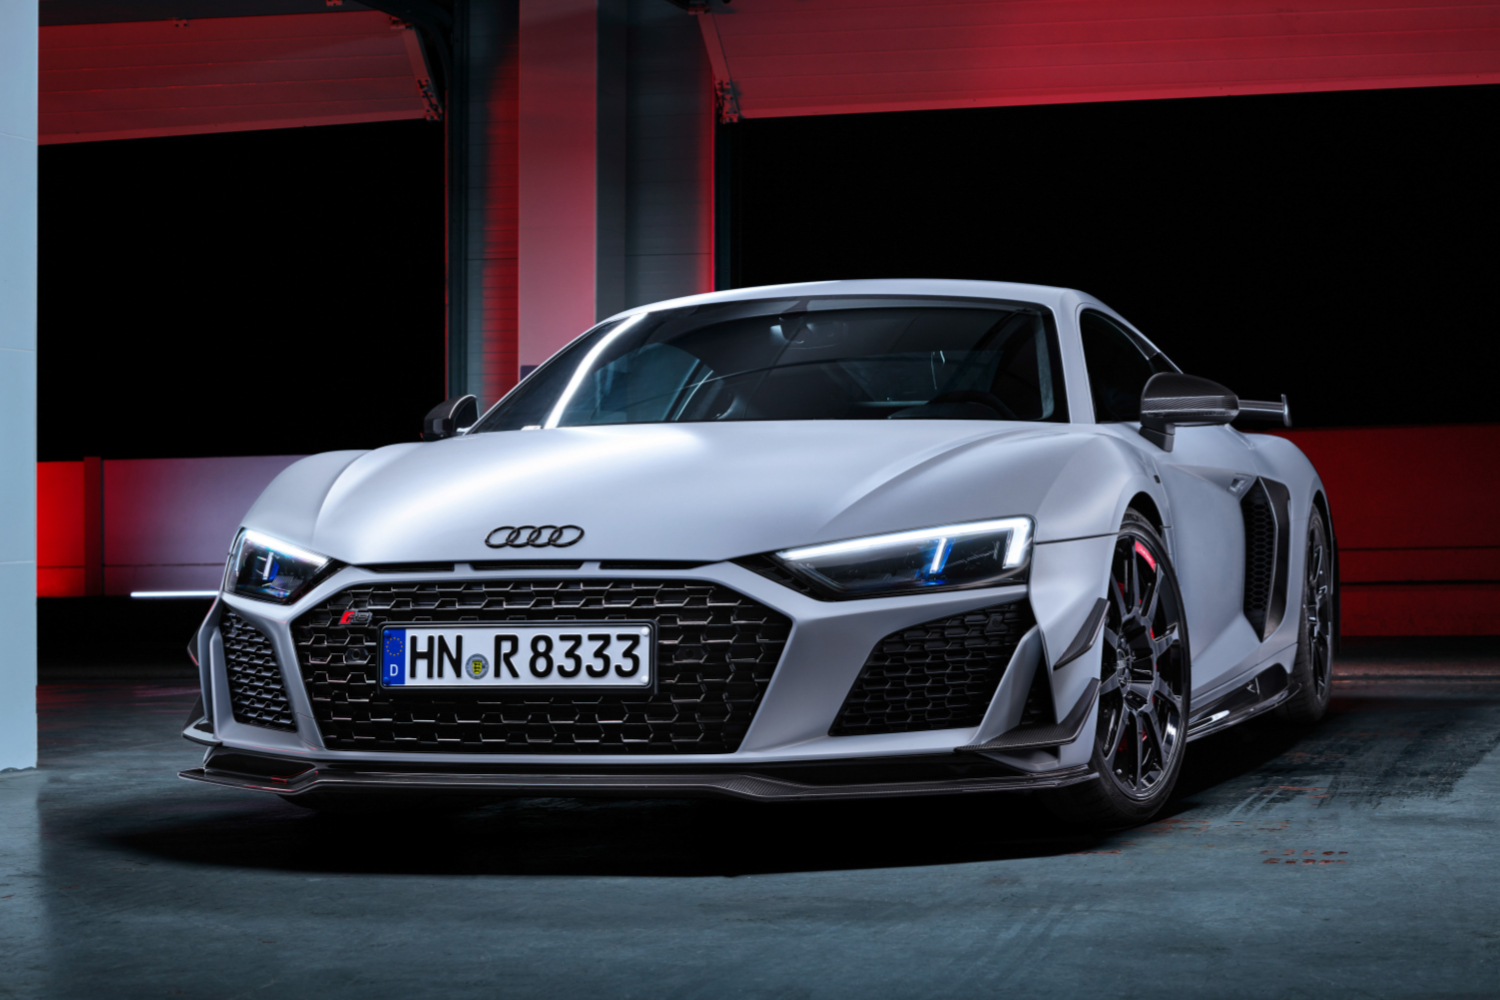 Audi announces limited-edition R8 V10 GT RWD. Image by Audi.